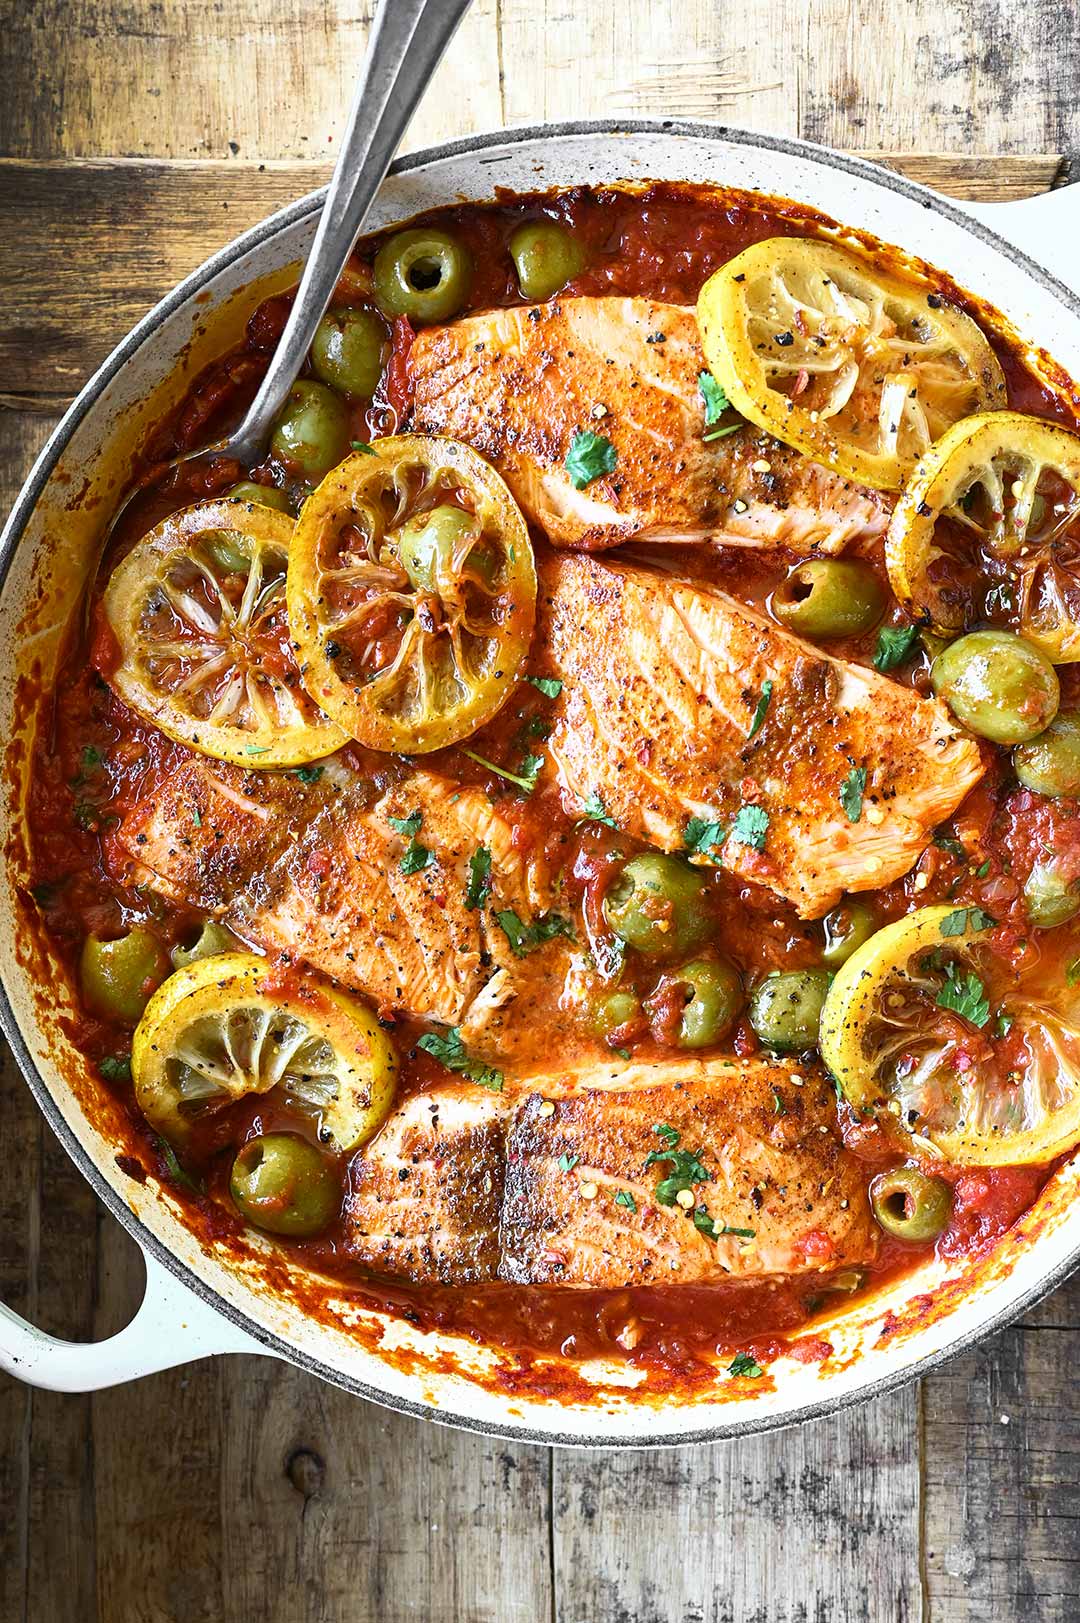 spicy moroccan salmon